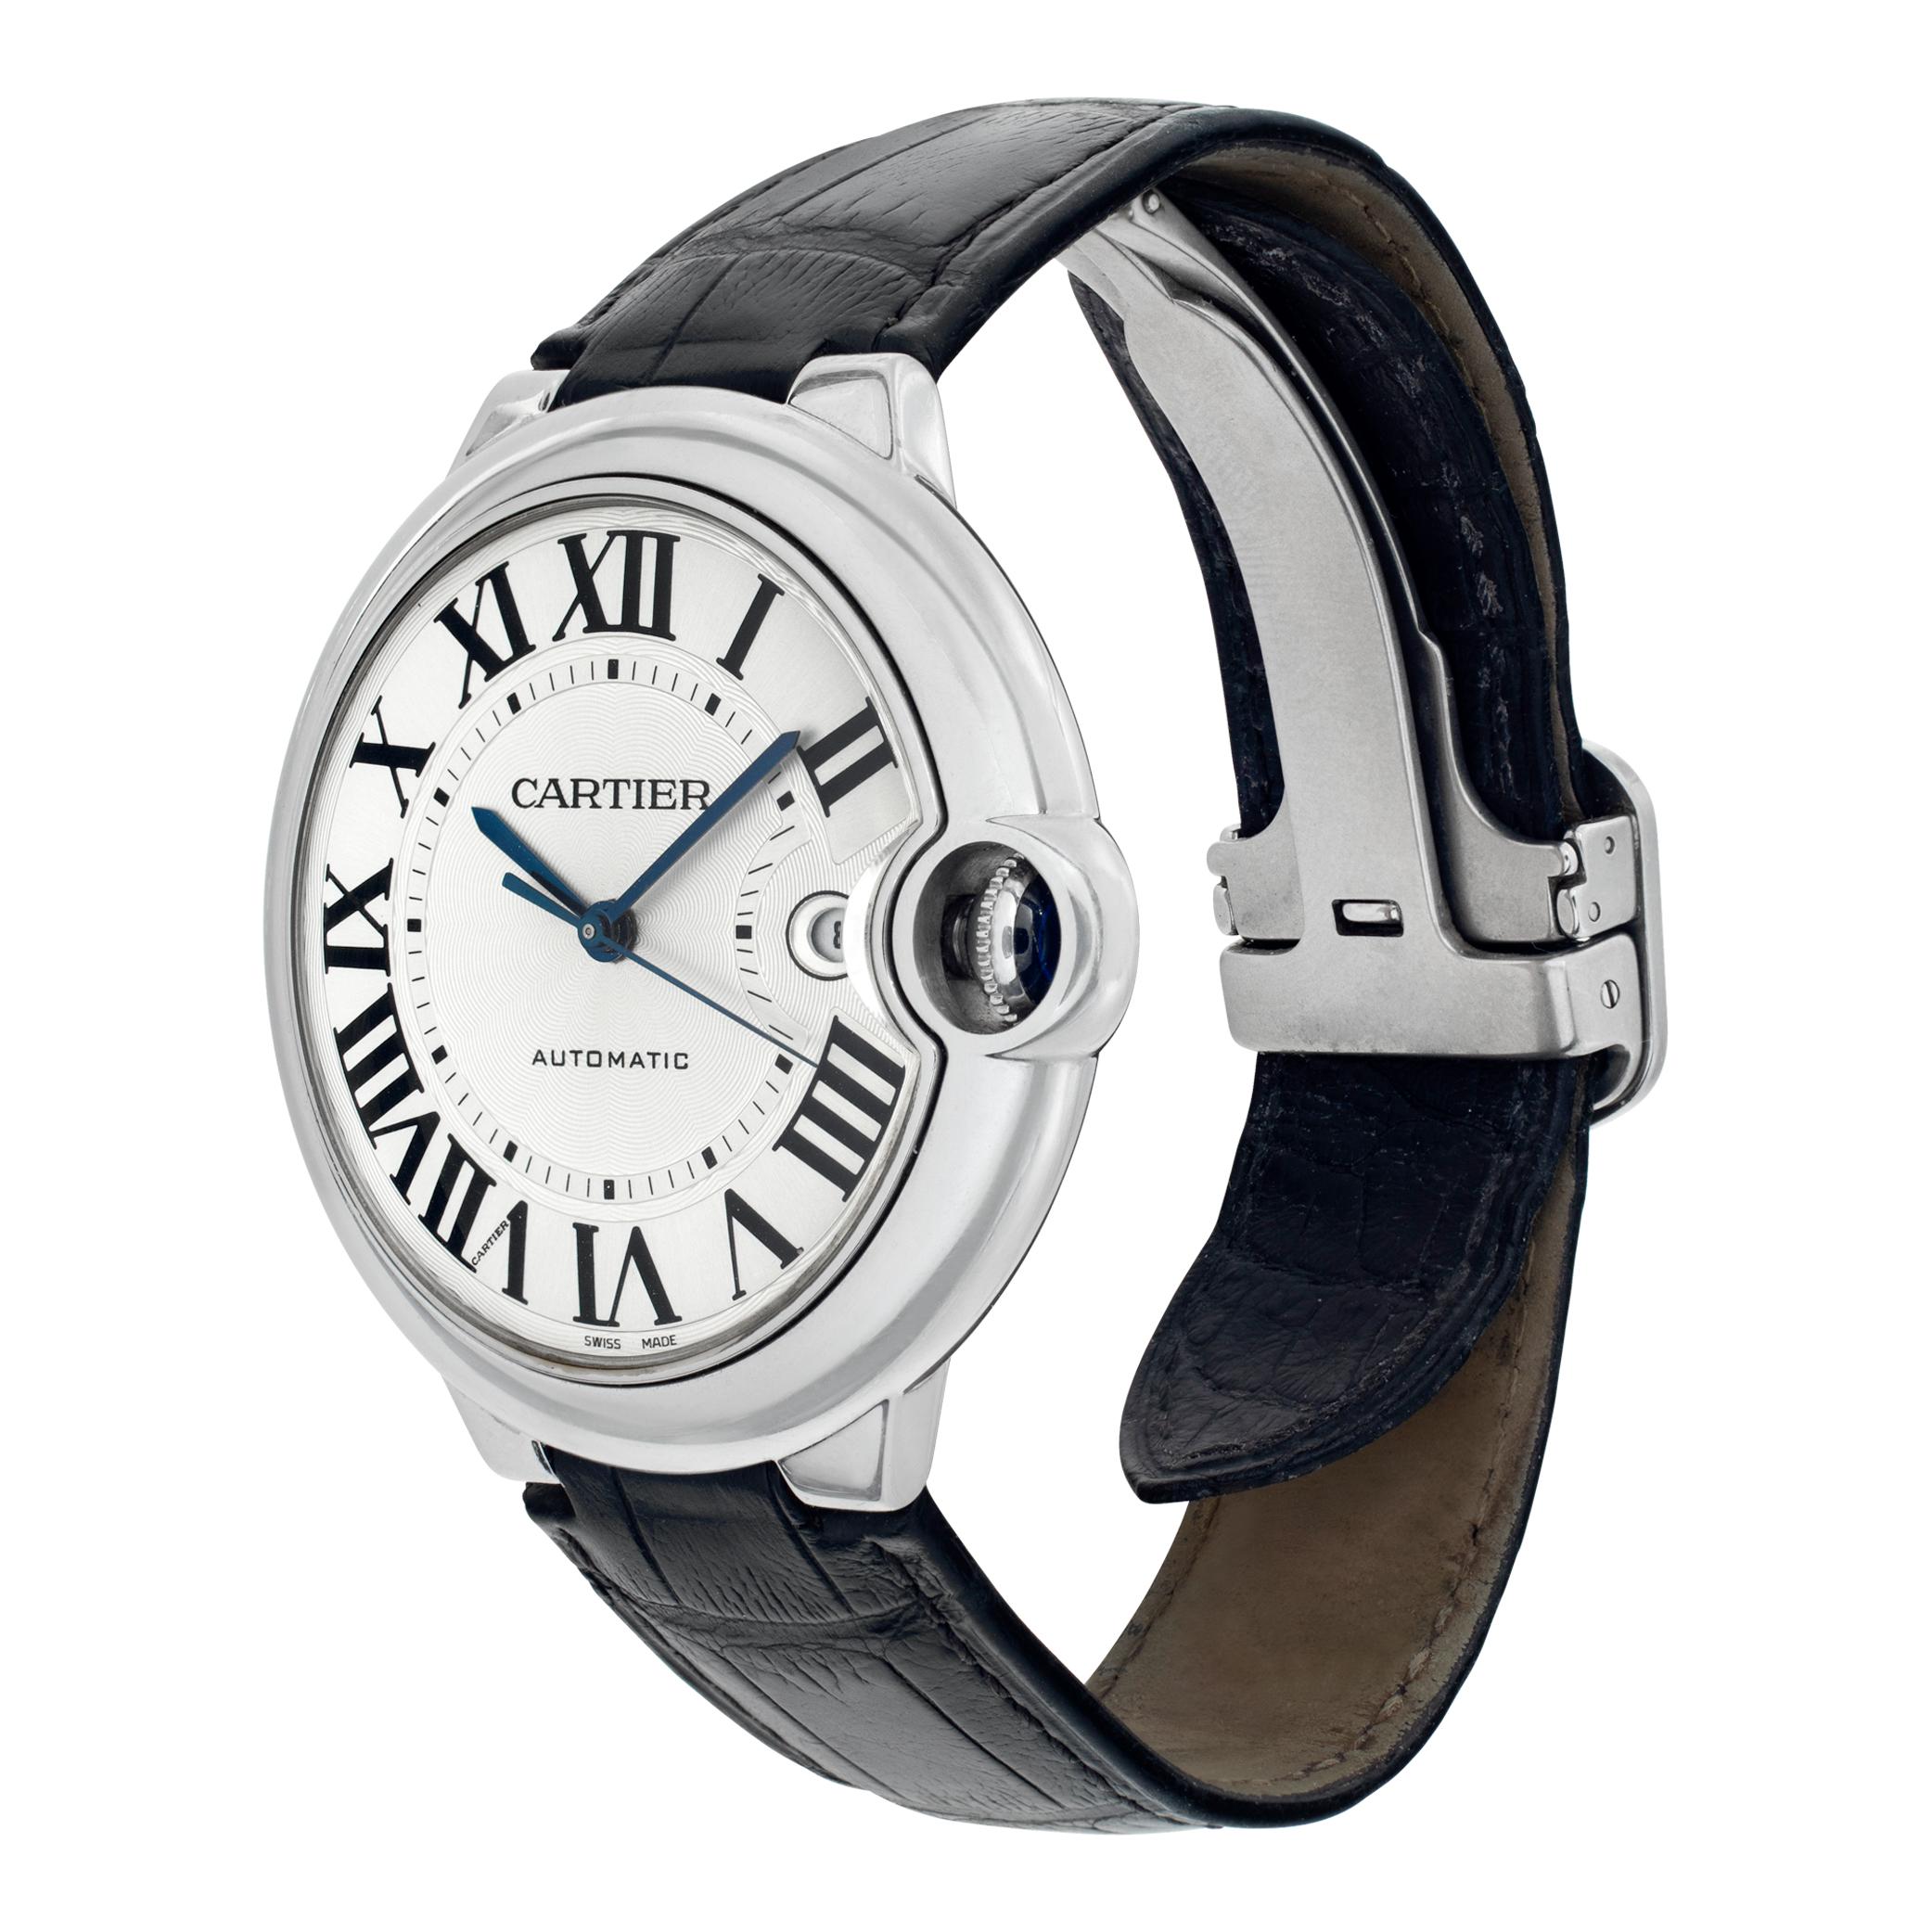 Cartier Ballon Bleu in stainless steel on an alligator strap with deployant buckle. Auto w/ sweep seconds and date. Box and papers.42 mm case size. Ref WSBB0026. Circa 2016. Fine Pre-owned Cartier Watch.

 Certified preowned Sport Cartier Ballon